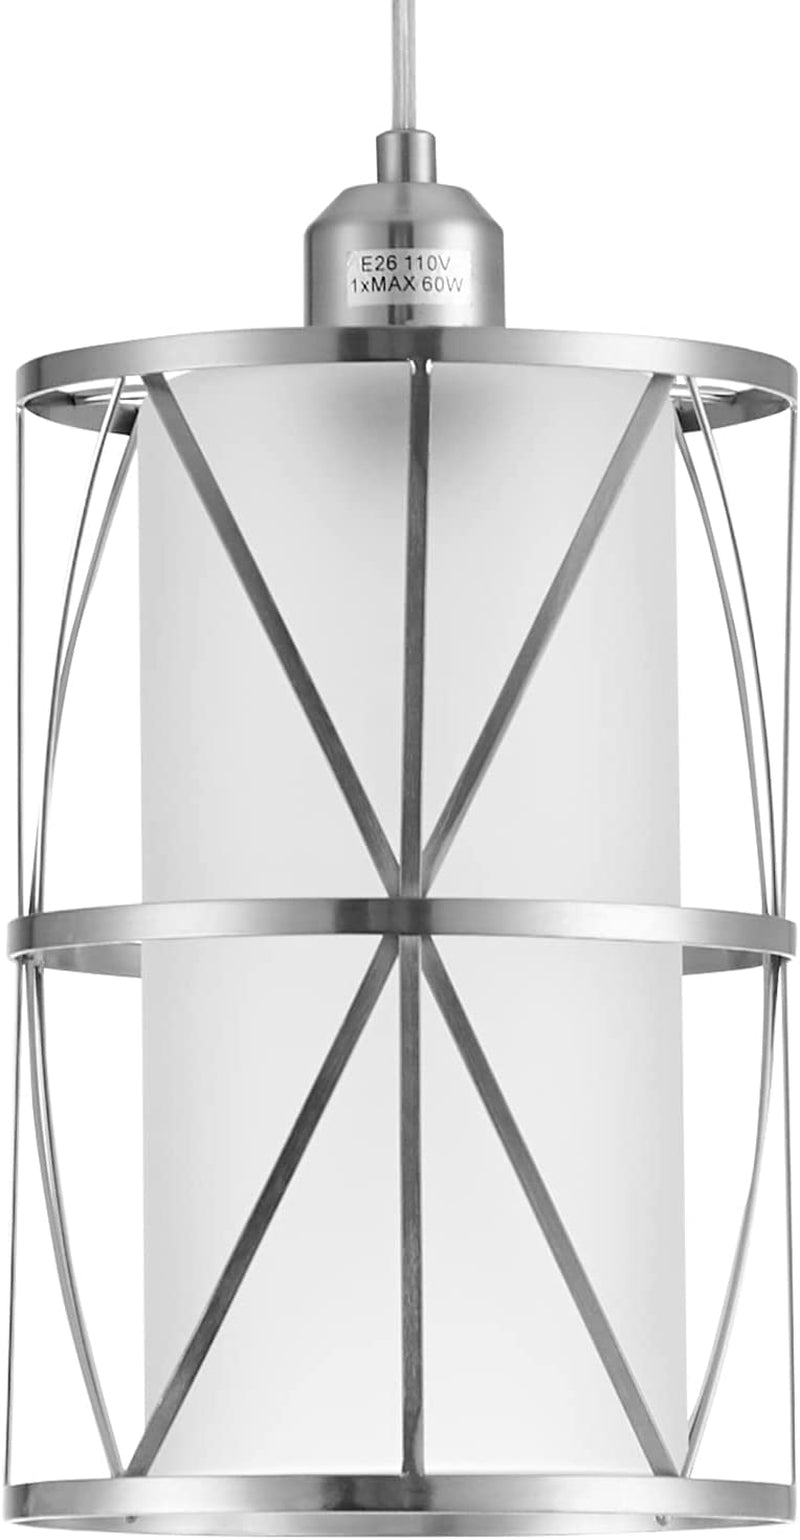 SHENGQINGTOP Modern Cylindrical Pendant Light with Frosted Glass, Brushed Nickel Hanging Light, Transitional Metal Pendant Lighting Fixture for Kitchen Island Sink Dining Room Bar, Led Bulb Included